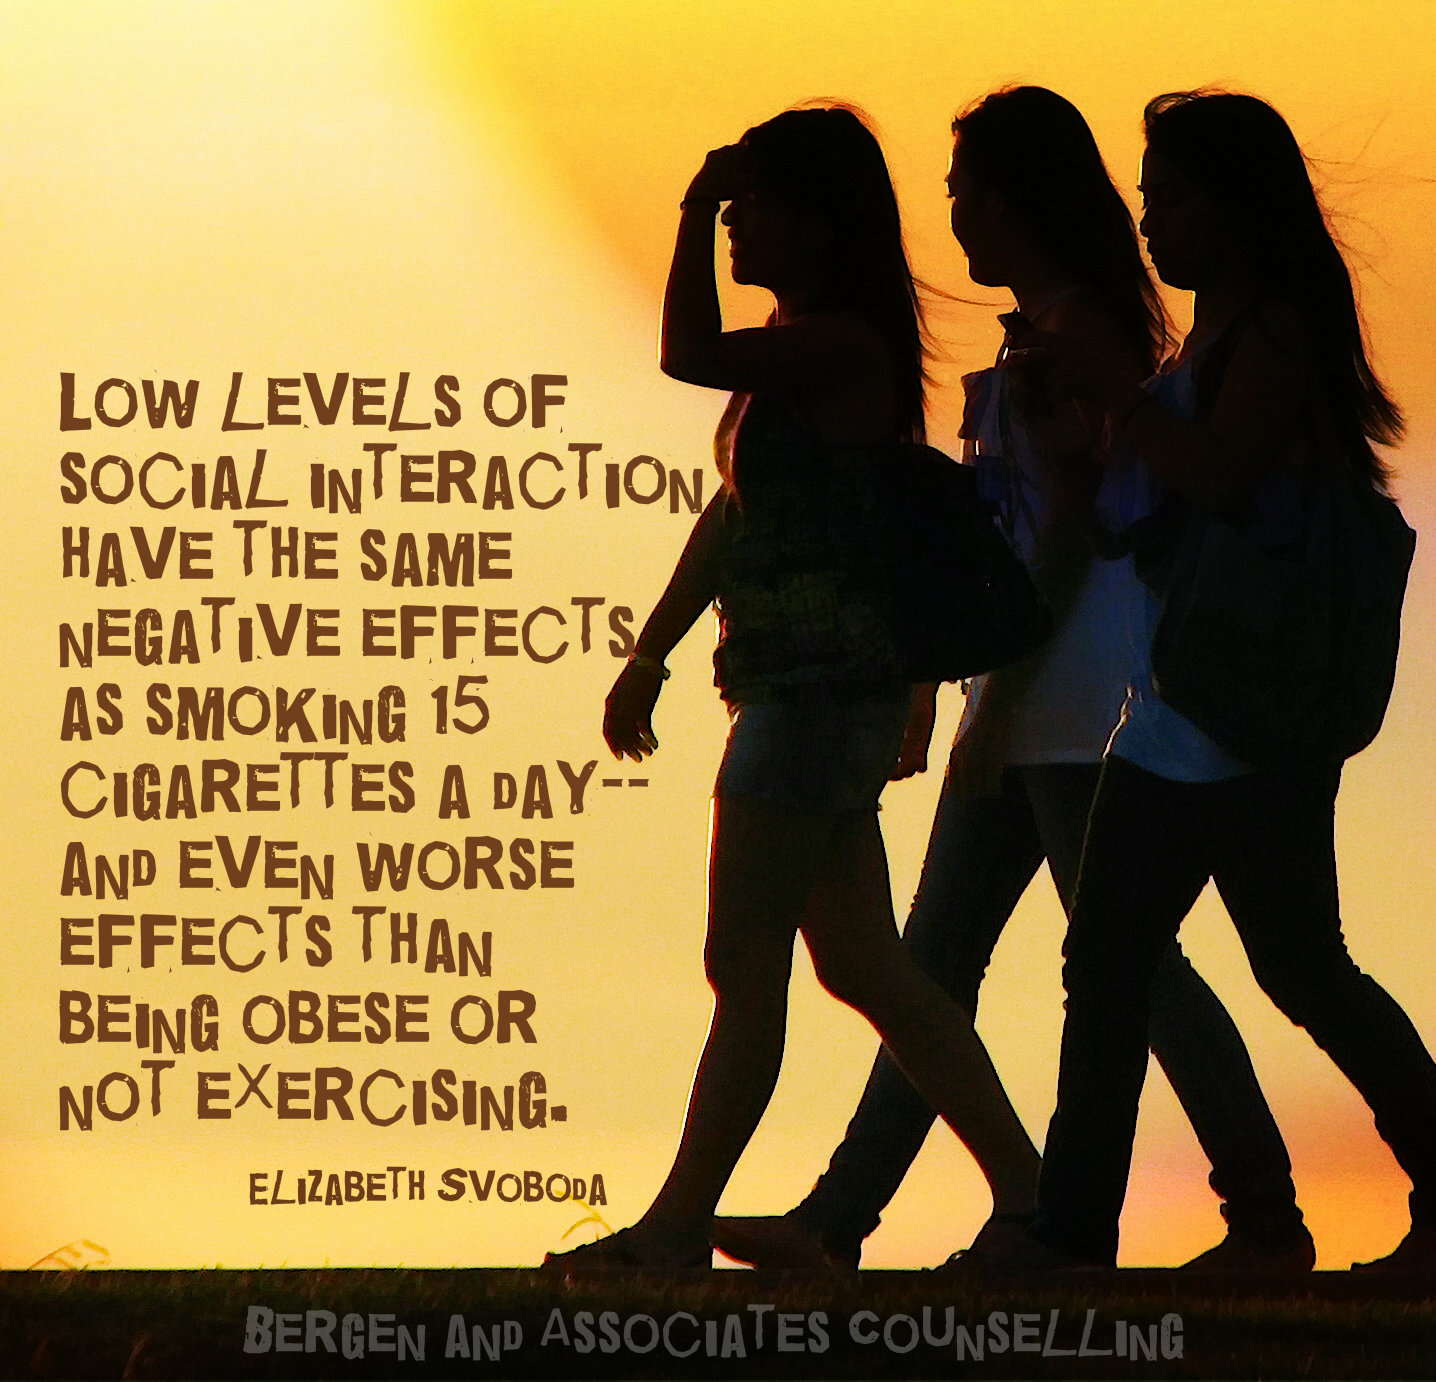 Low levels of social interaction have the same negative effects as smoking 15 cigarettes a day. information by Psychology Today.  Poster by Bergen and Associates.